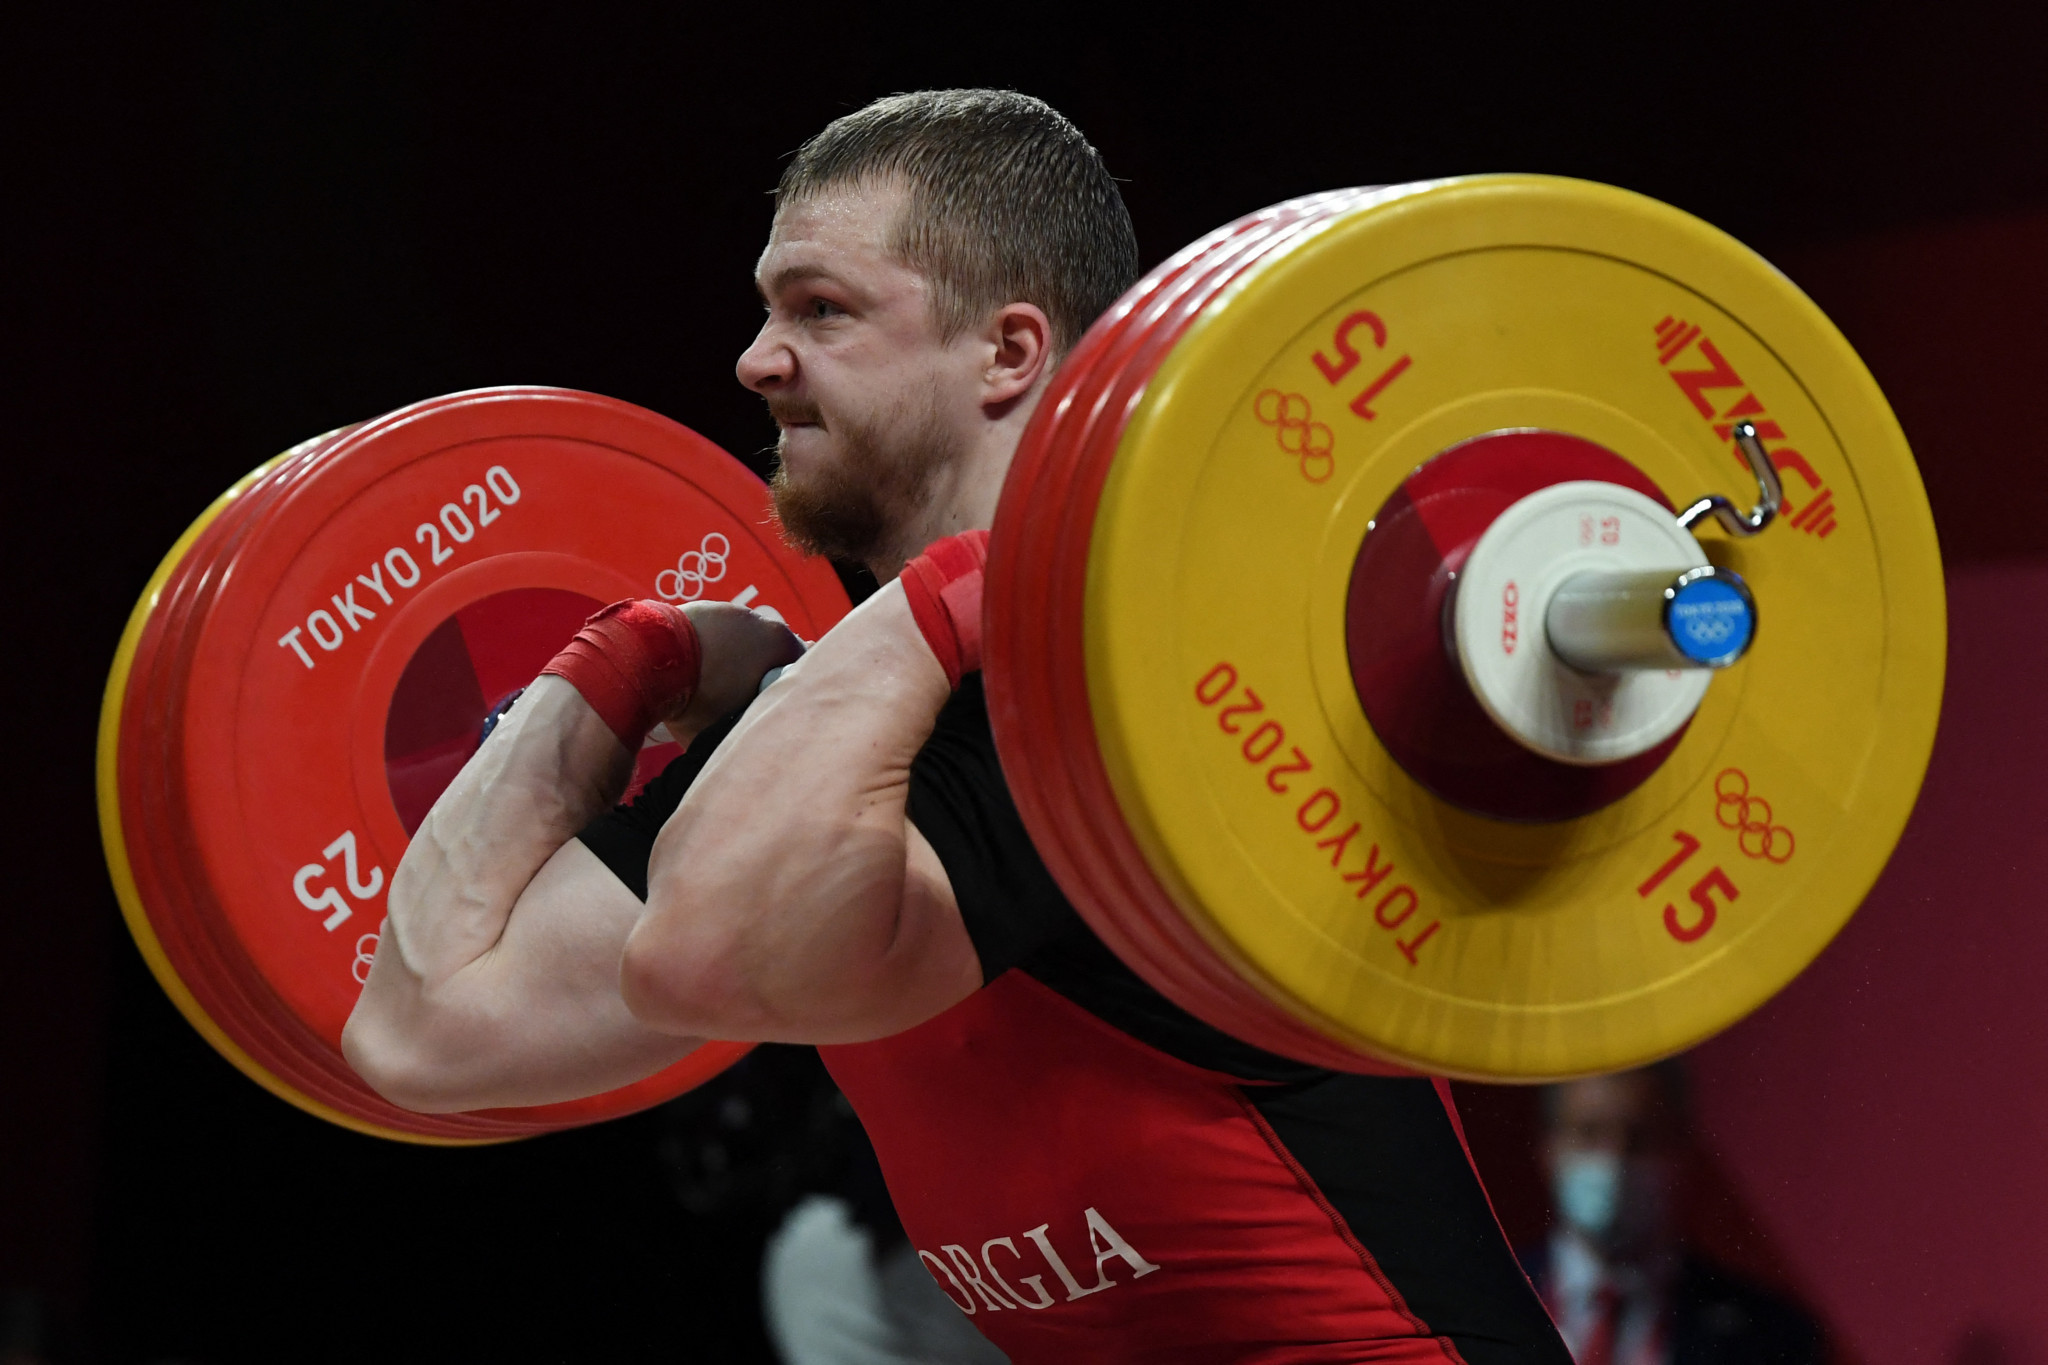 Another weightlifting coach banned for life - and a third Tokyo 2020 medallist suspended